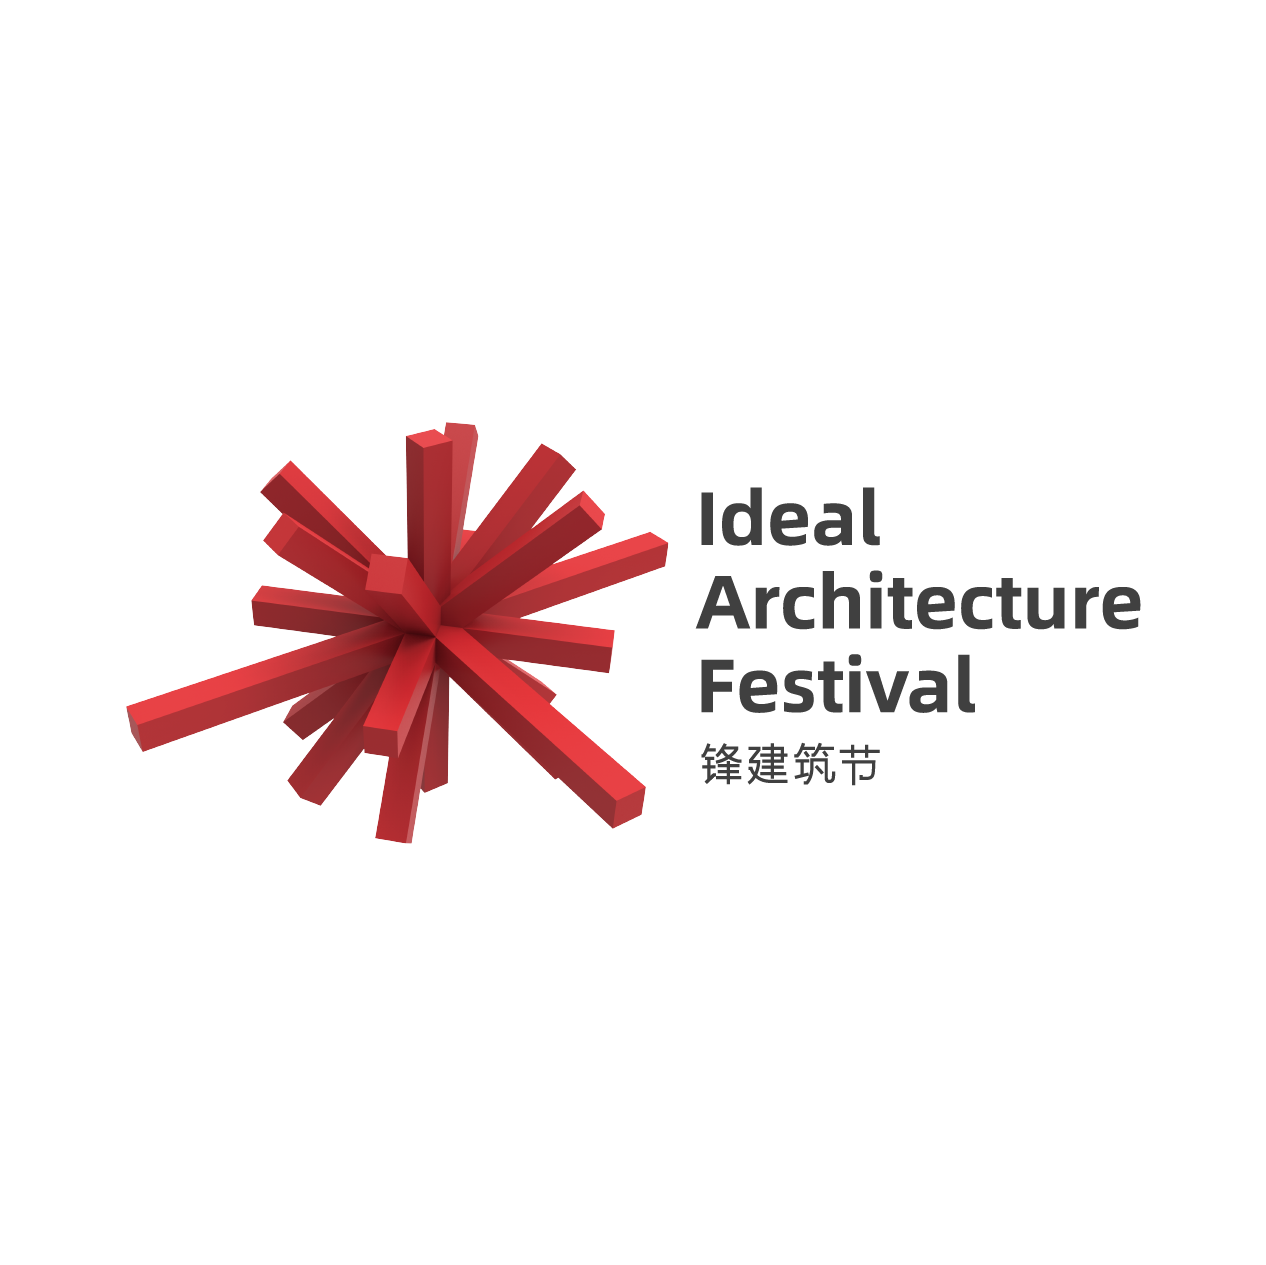 IDEAL ARCHITECTURE FESTIVAL 2021 – BEST OF THE BEST AWARD